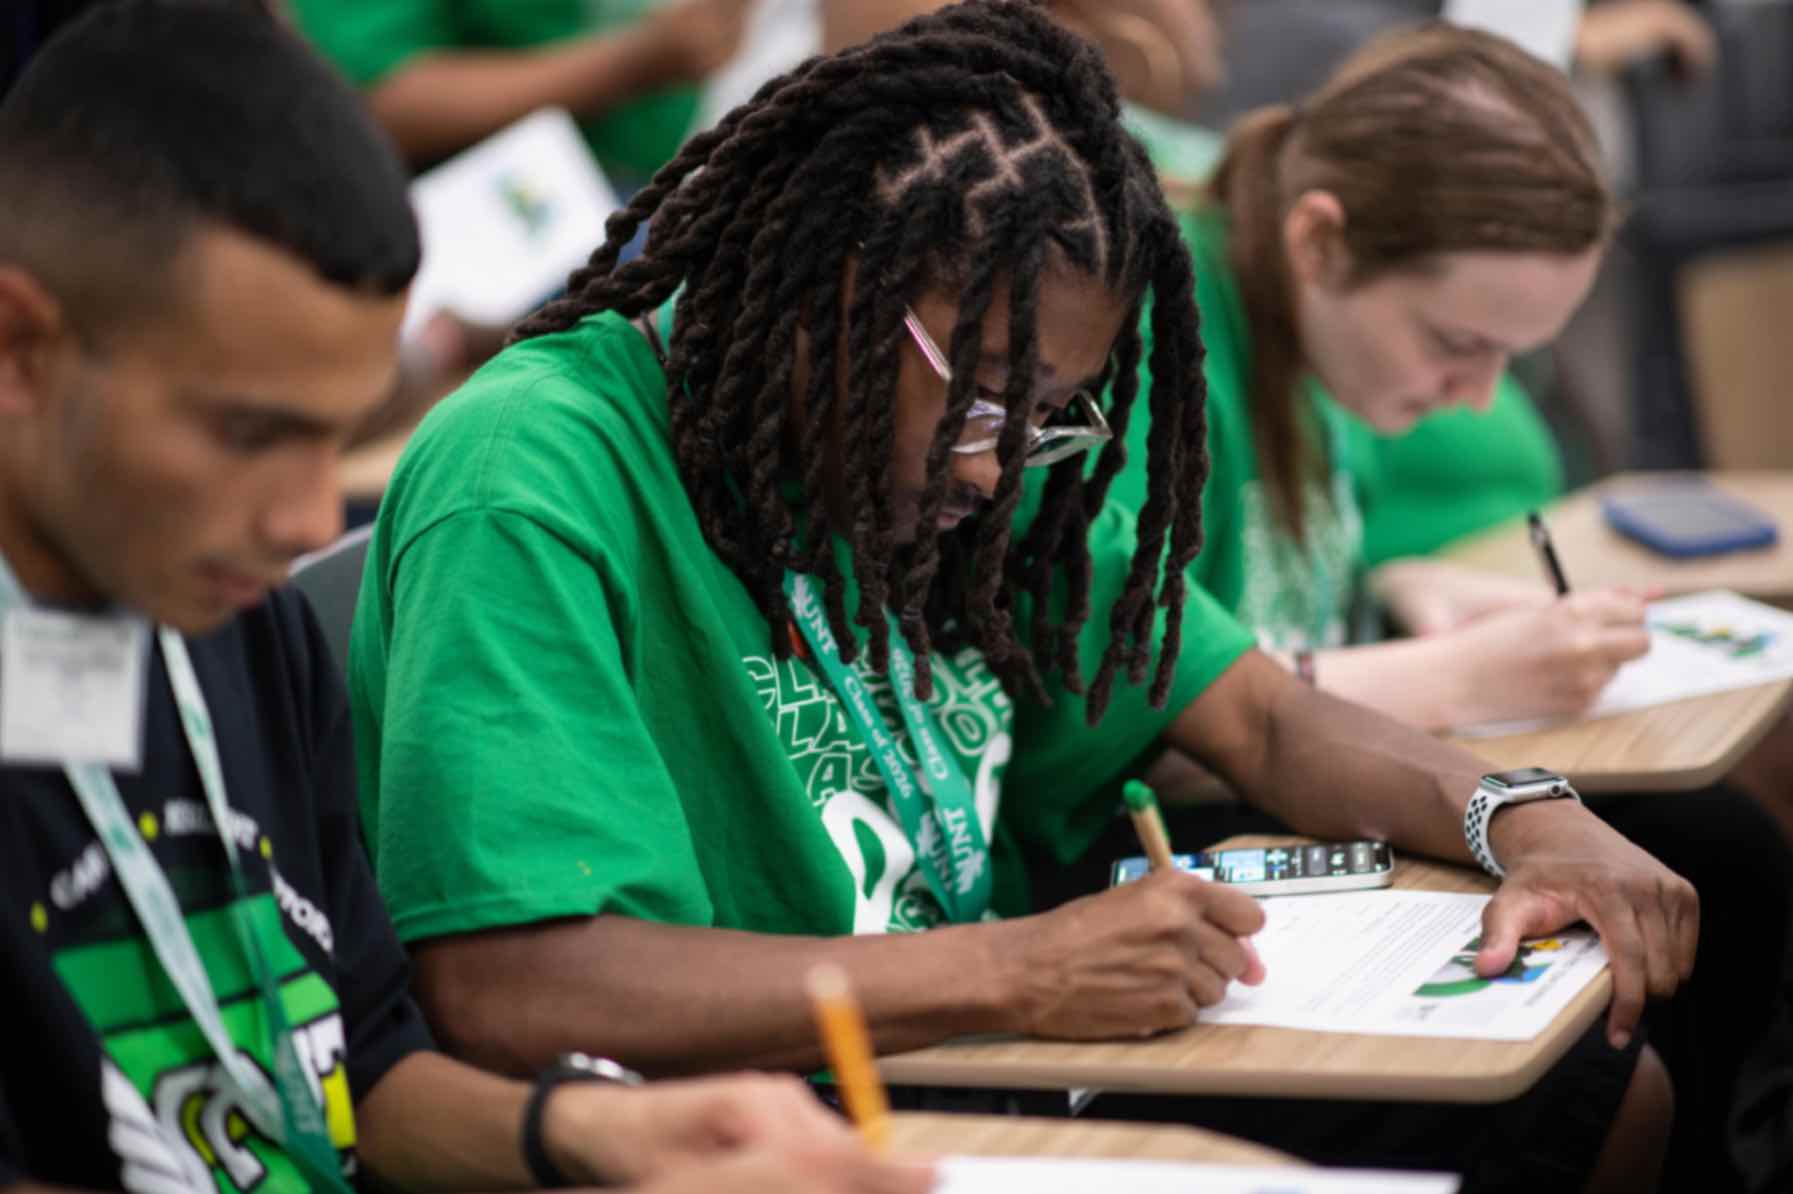 A student in a green shirt writes 